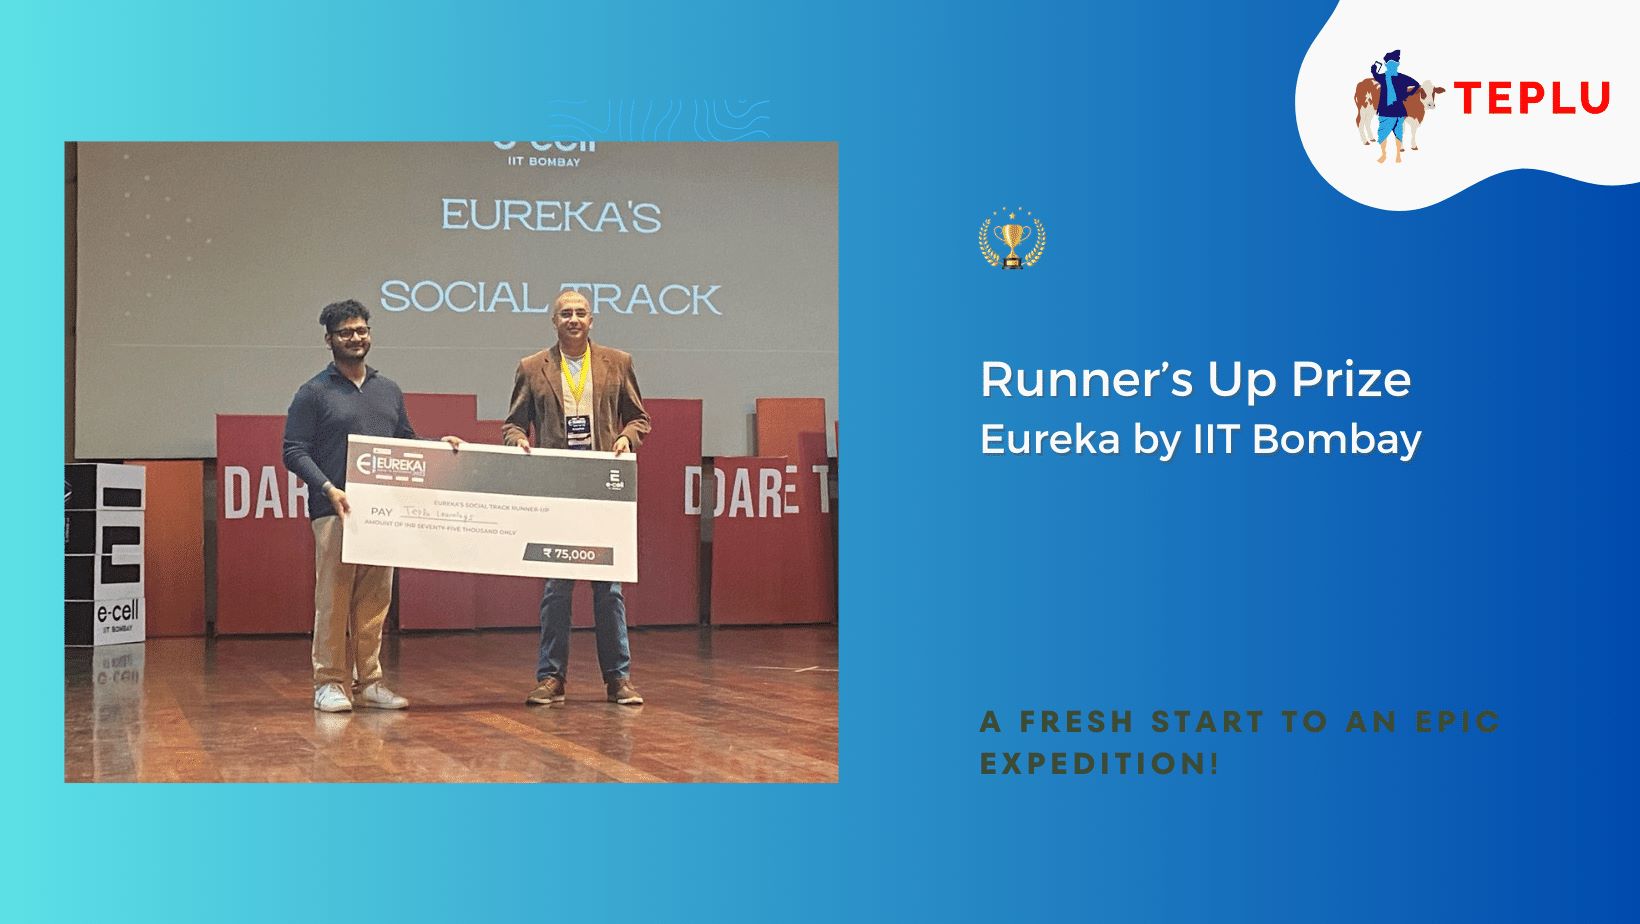 Teplu wins a coveted position at Eireka by Ecell IIT Bombay